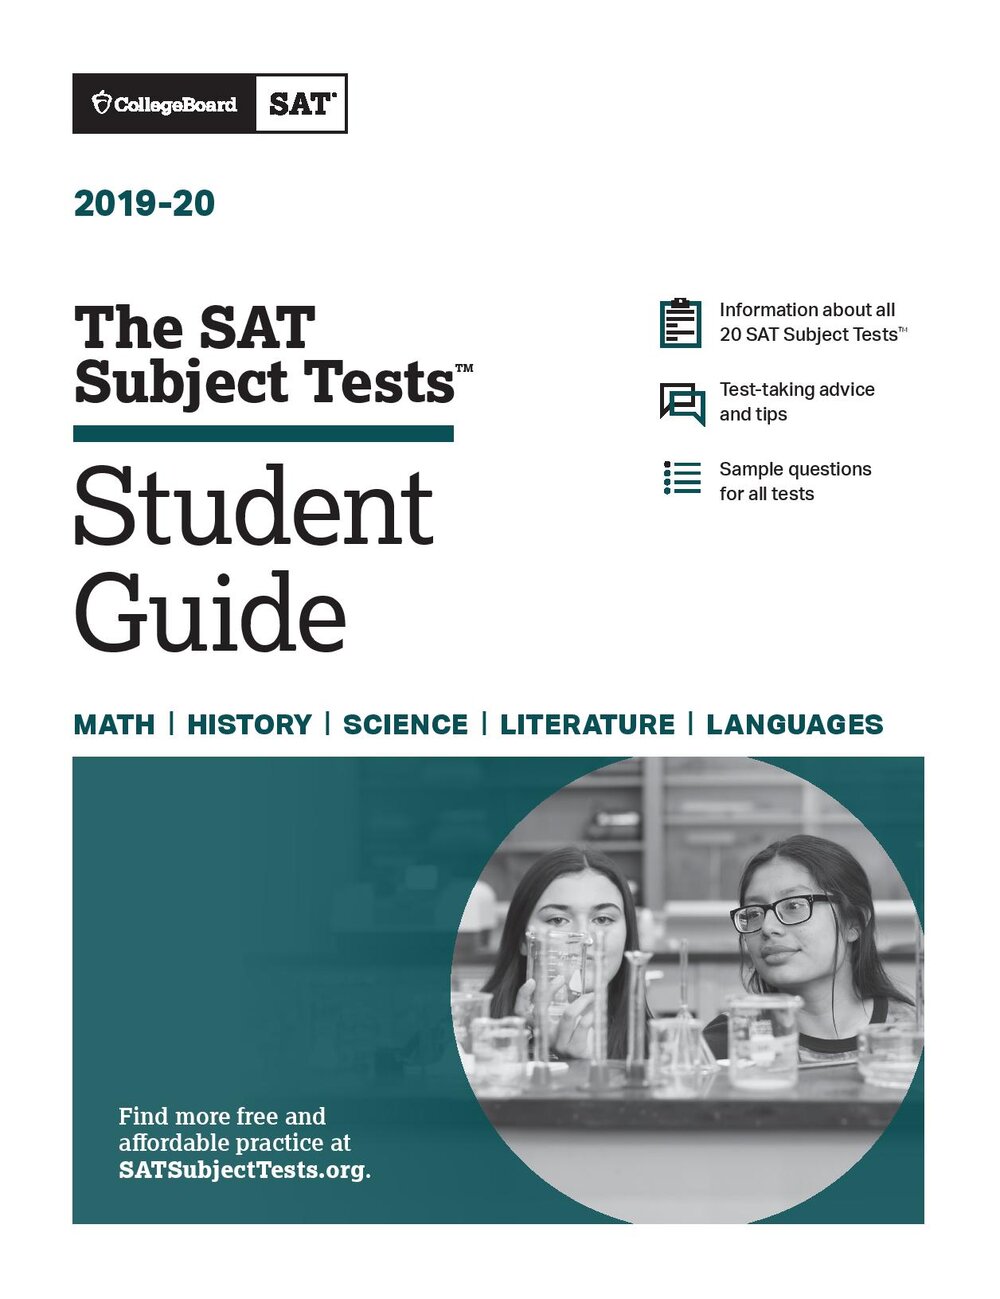 pdf_sat-subject-tests-student-guide-page-001.jpg